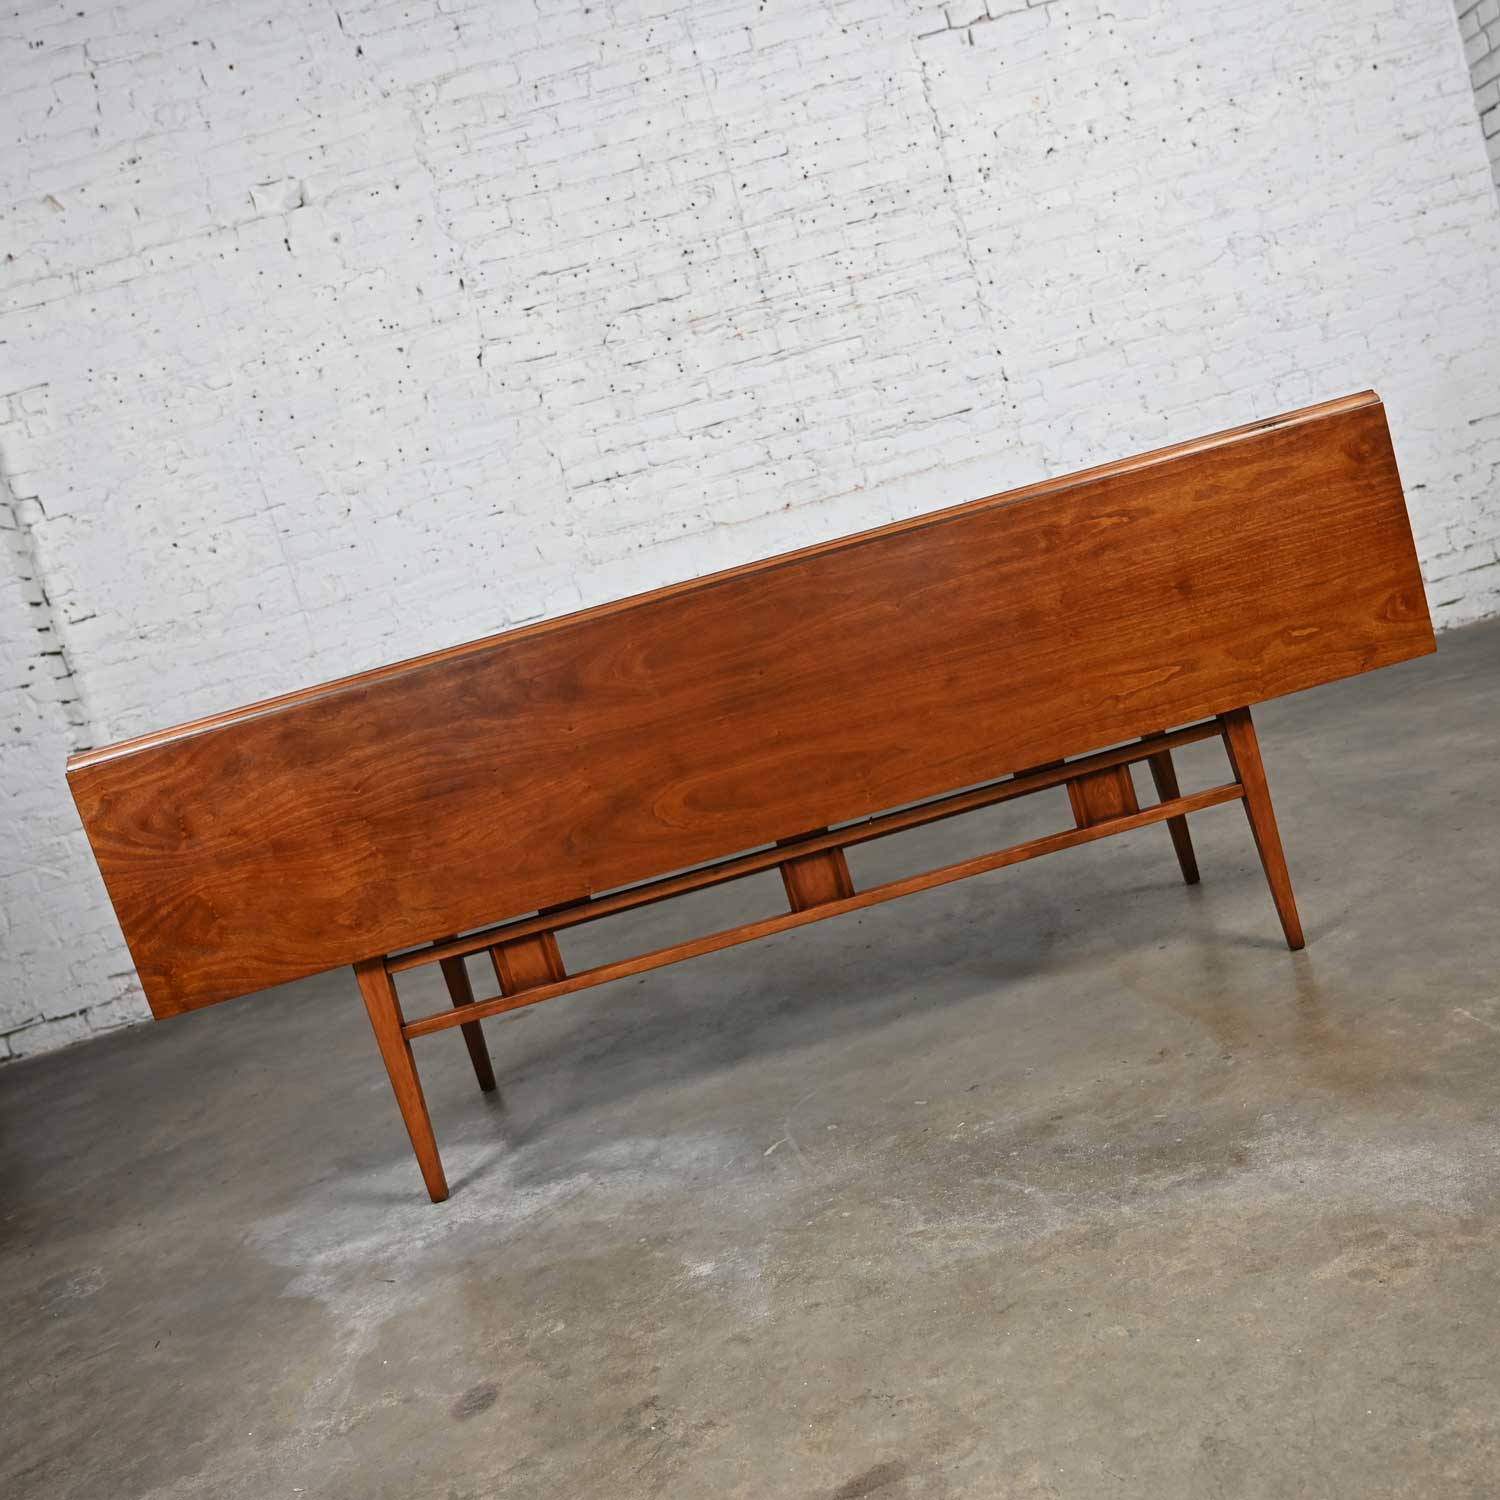 Vintage Mid-Century Modern Maple Drop Leaf Dining Table Attributed to Statesville Chair Company